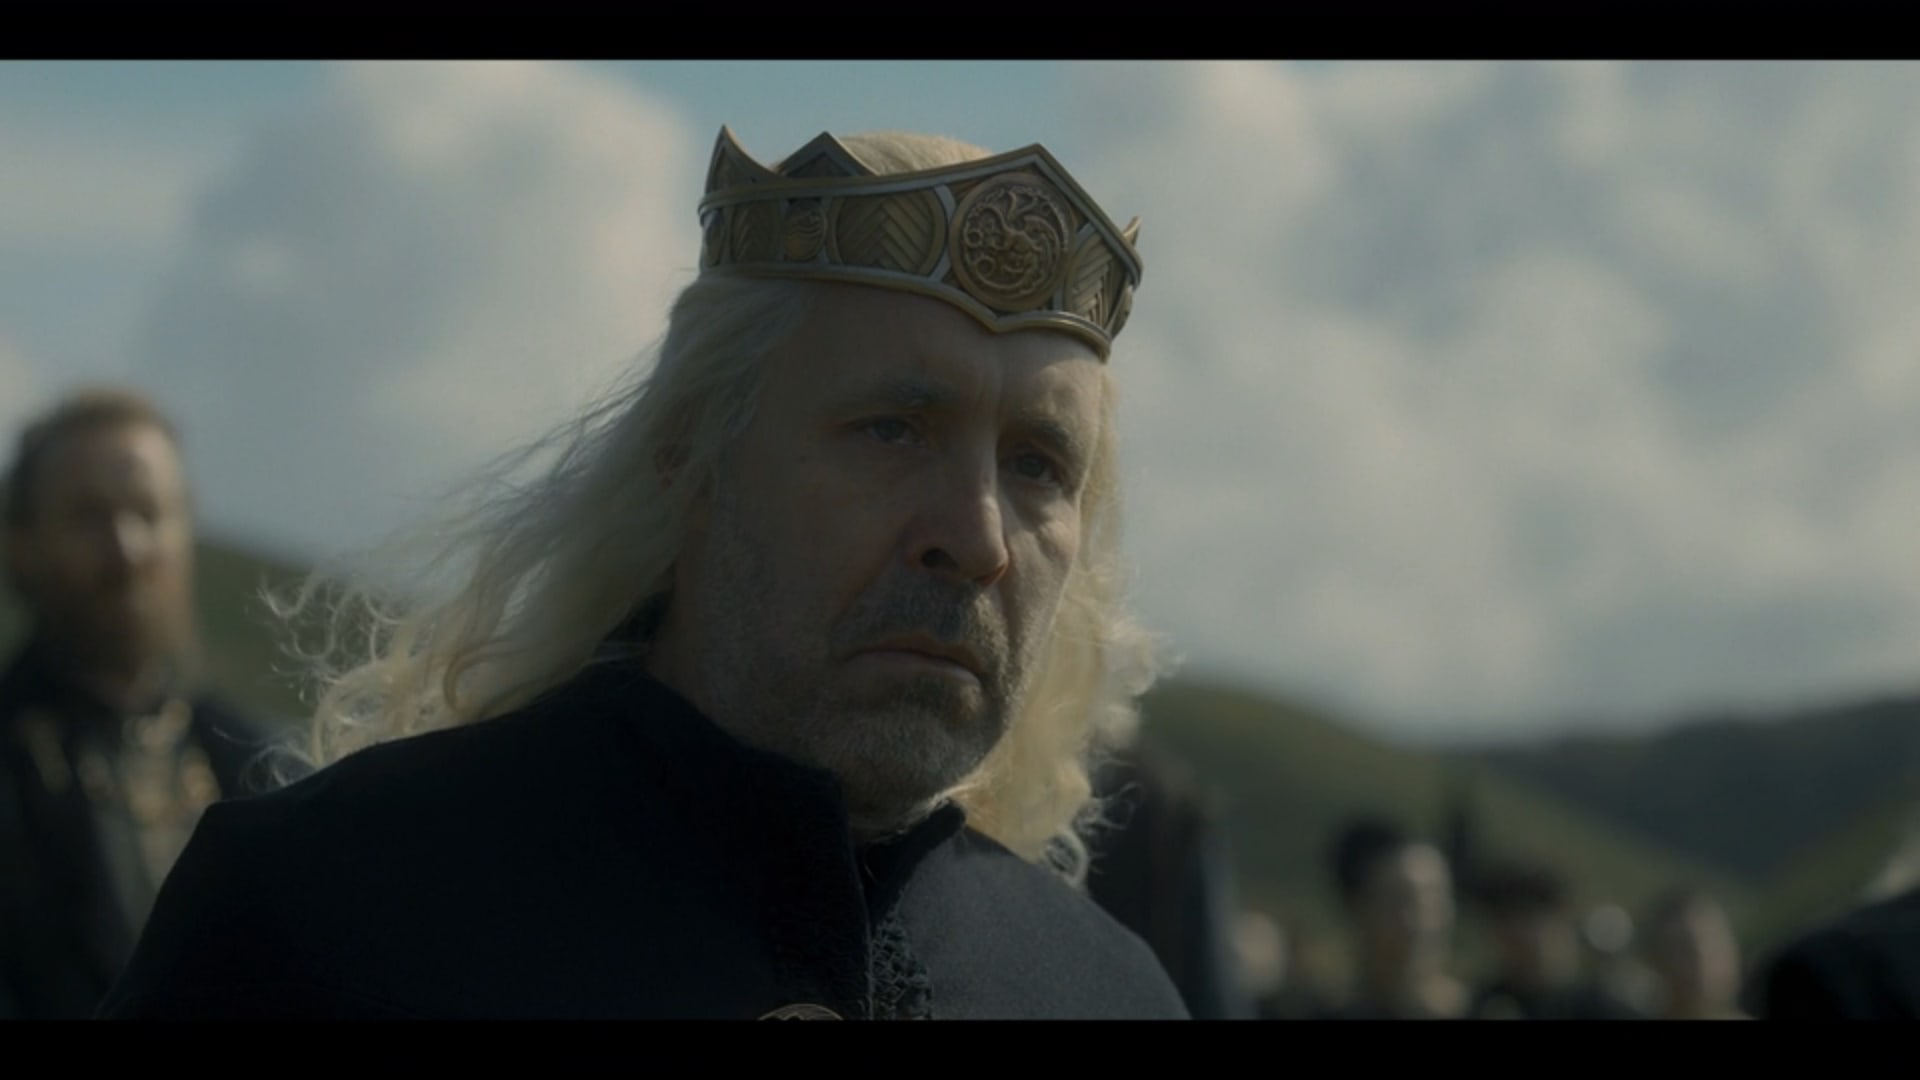 Viserys (Paddy Considine) in mourning